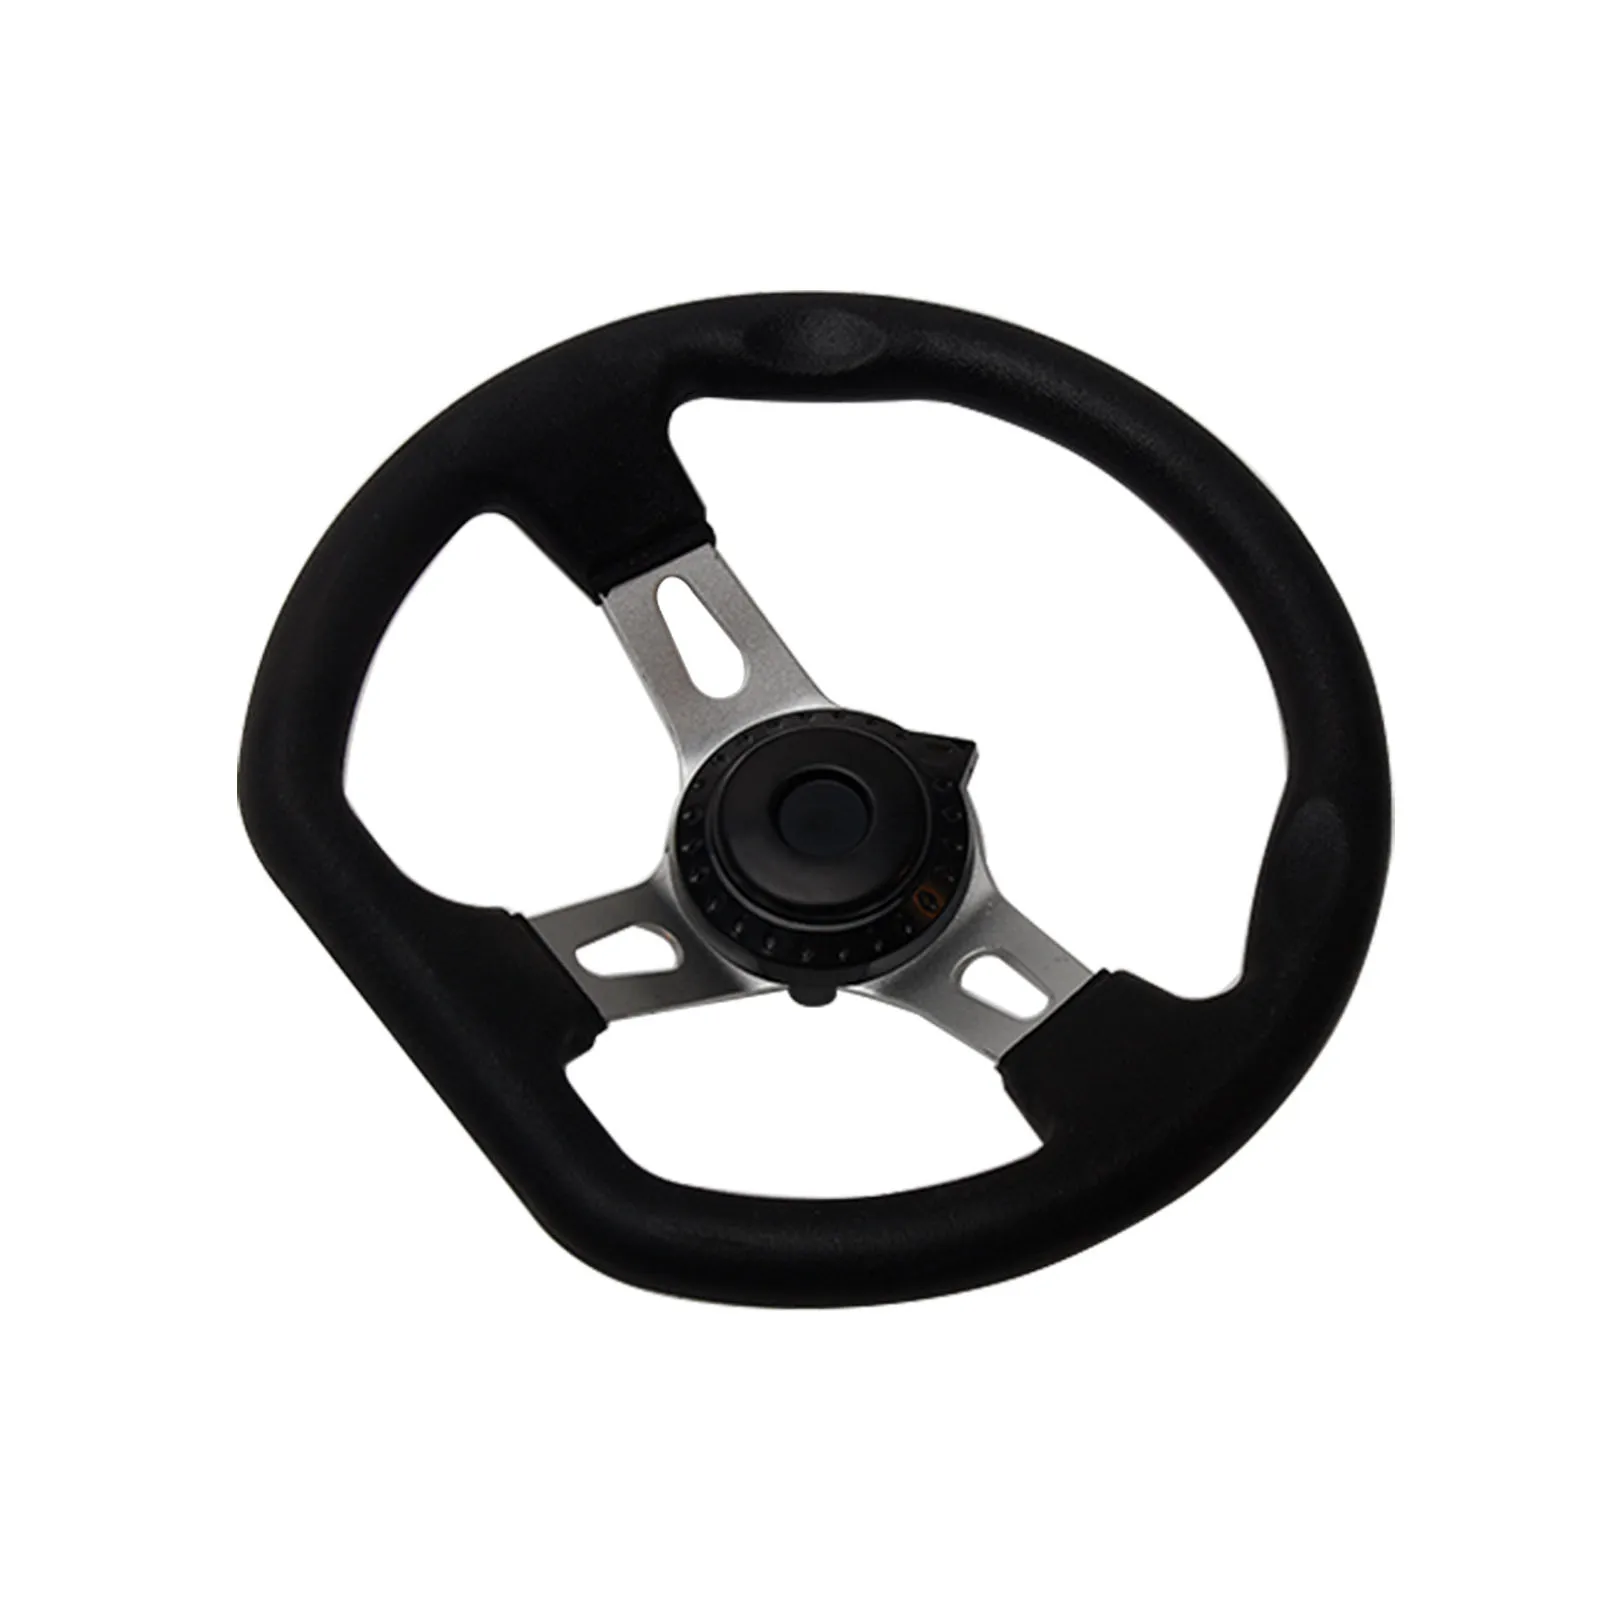 Details about   270mm Interior Vehicle 3 Spokes For Go Kart Steering Wheel PU Foam With Holes 